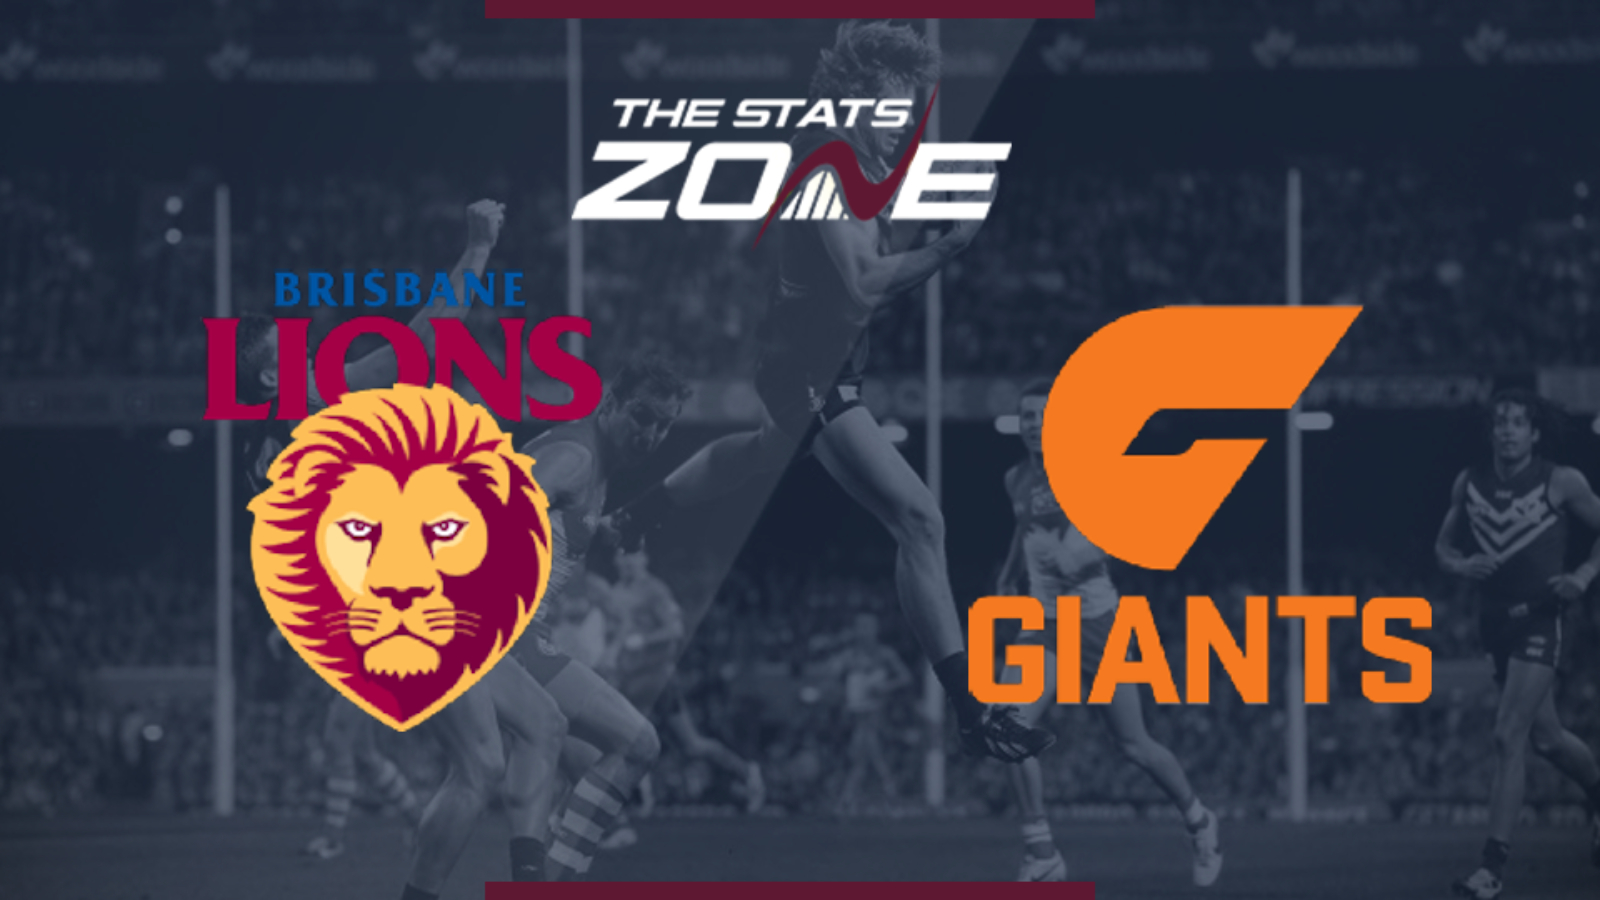 2019 Afl Brisbane Lions Vs Gws Giants Preview And Prediction The